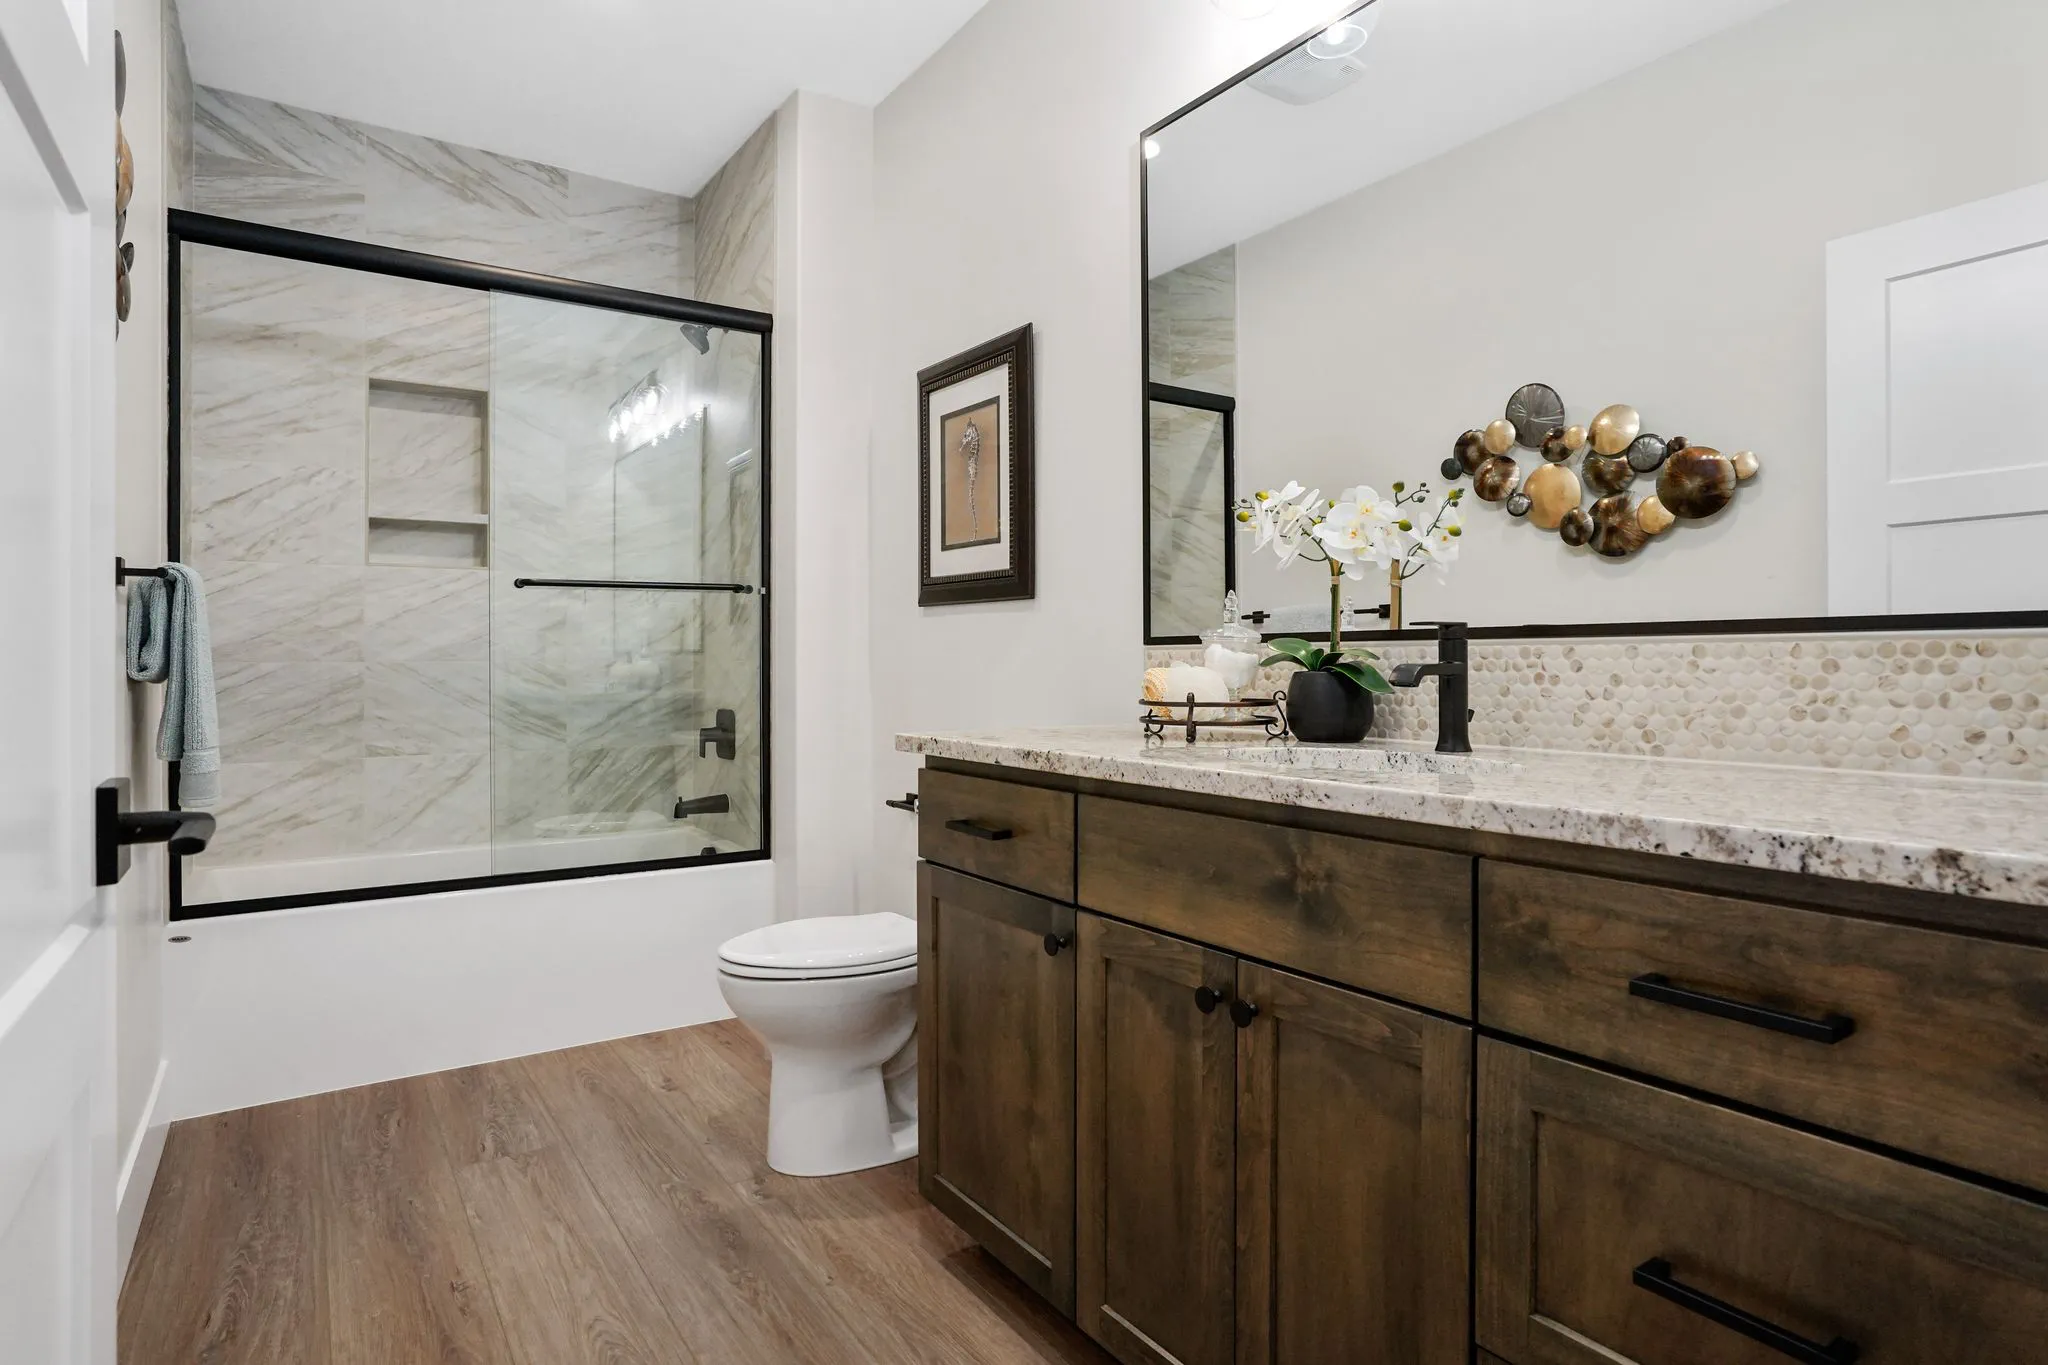 Bathroom With Dark Stained Cabinets And Large Mirrors And Ceiling High Tile Work